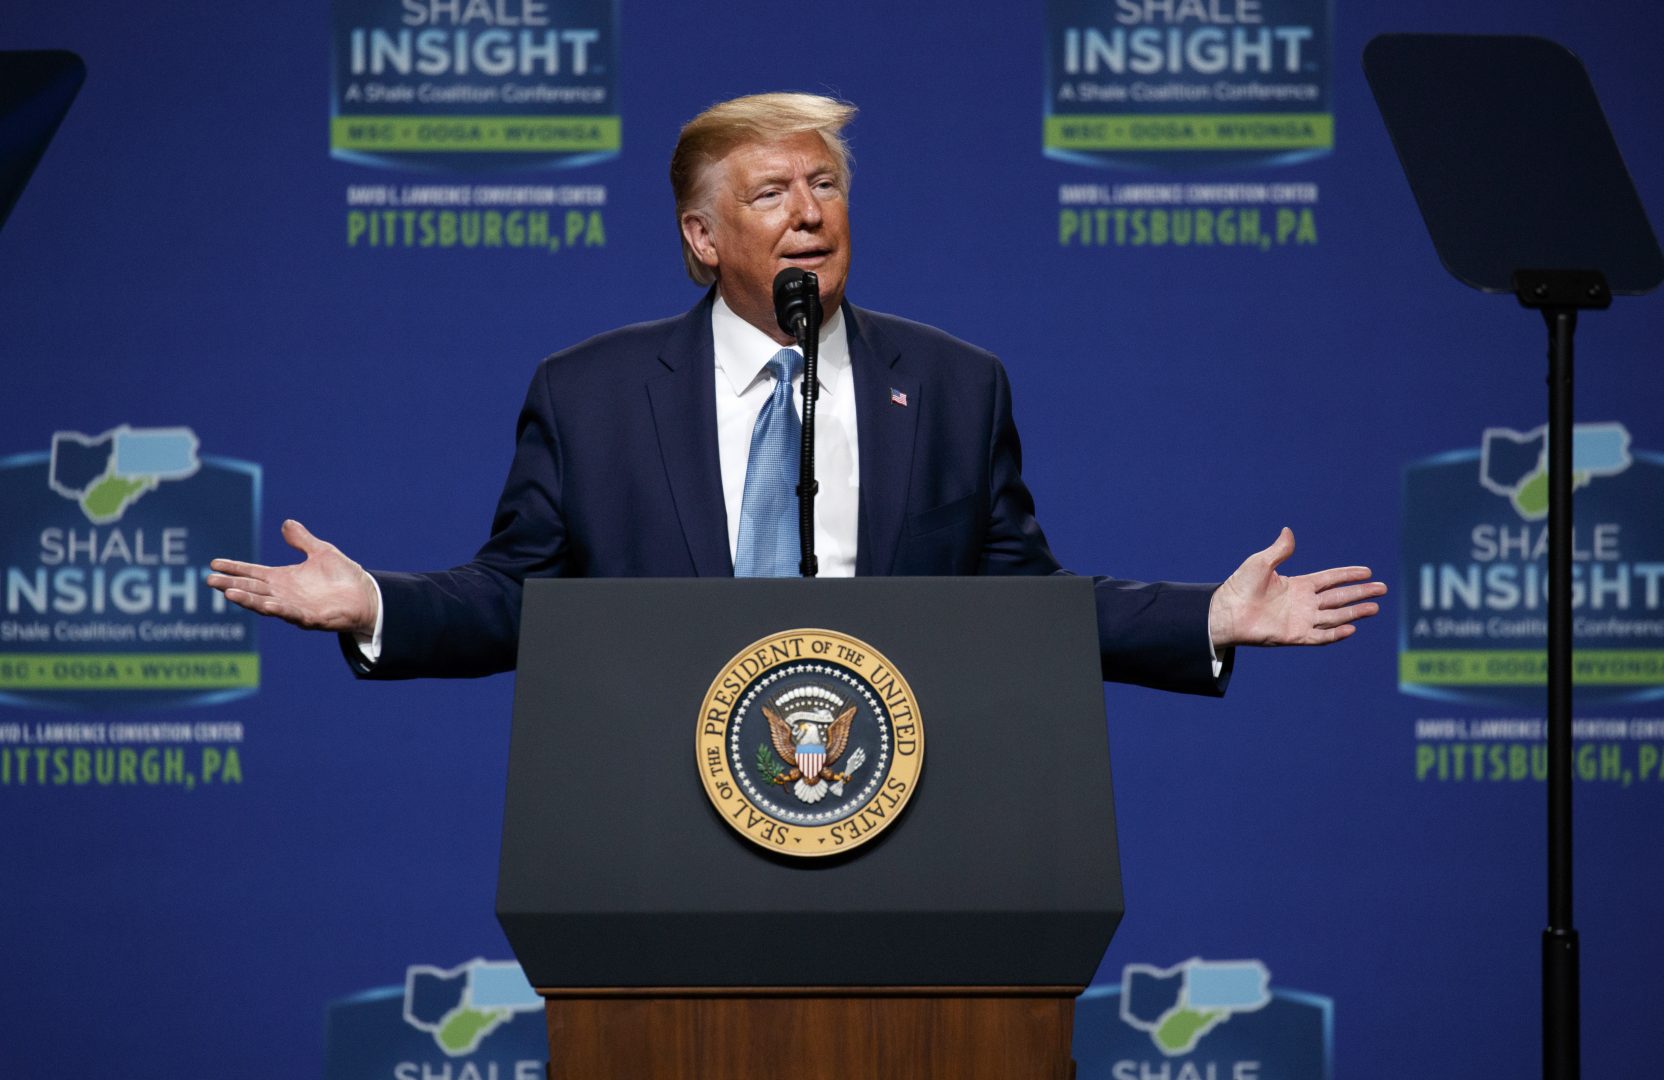 President Donald Trump speaks at the 9th annual Shale Insight Conference at the David L. Lawrence Convention Center, Wednesday, Oct. 23, 2019, in Pittsburgh.